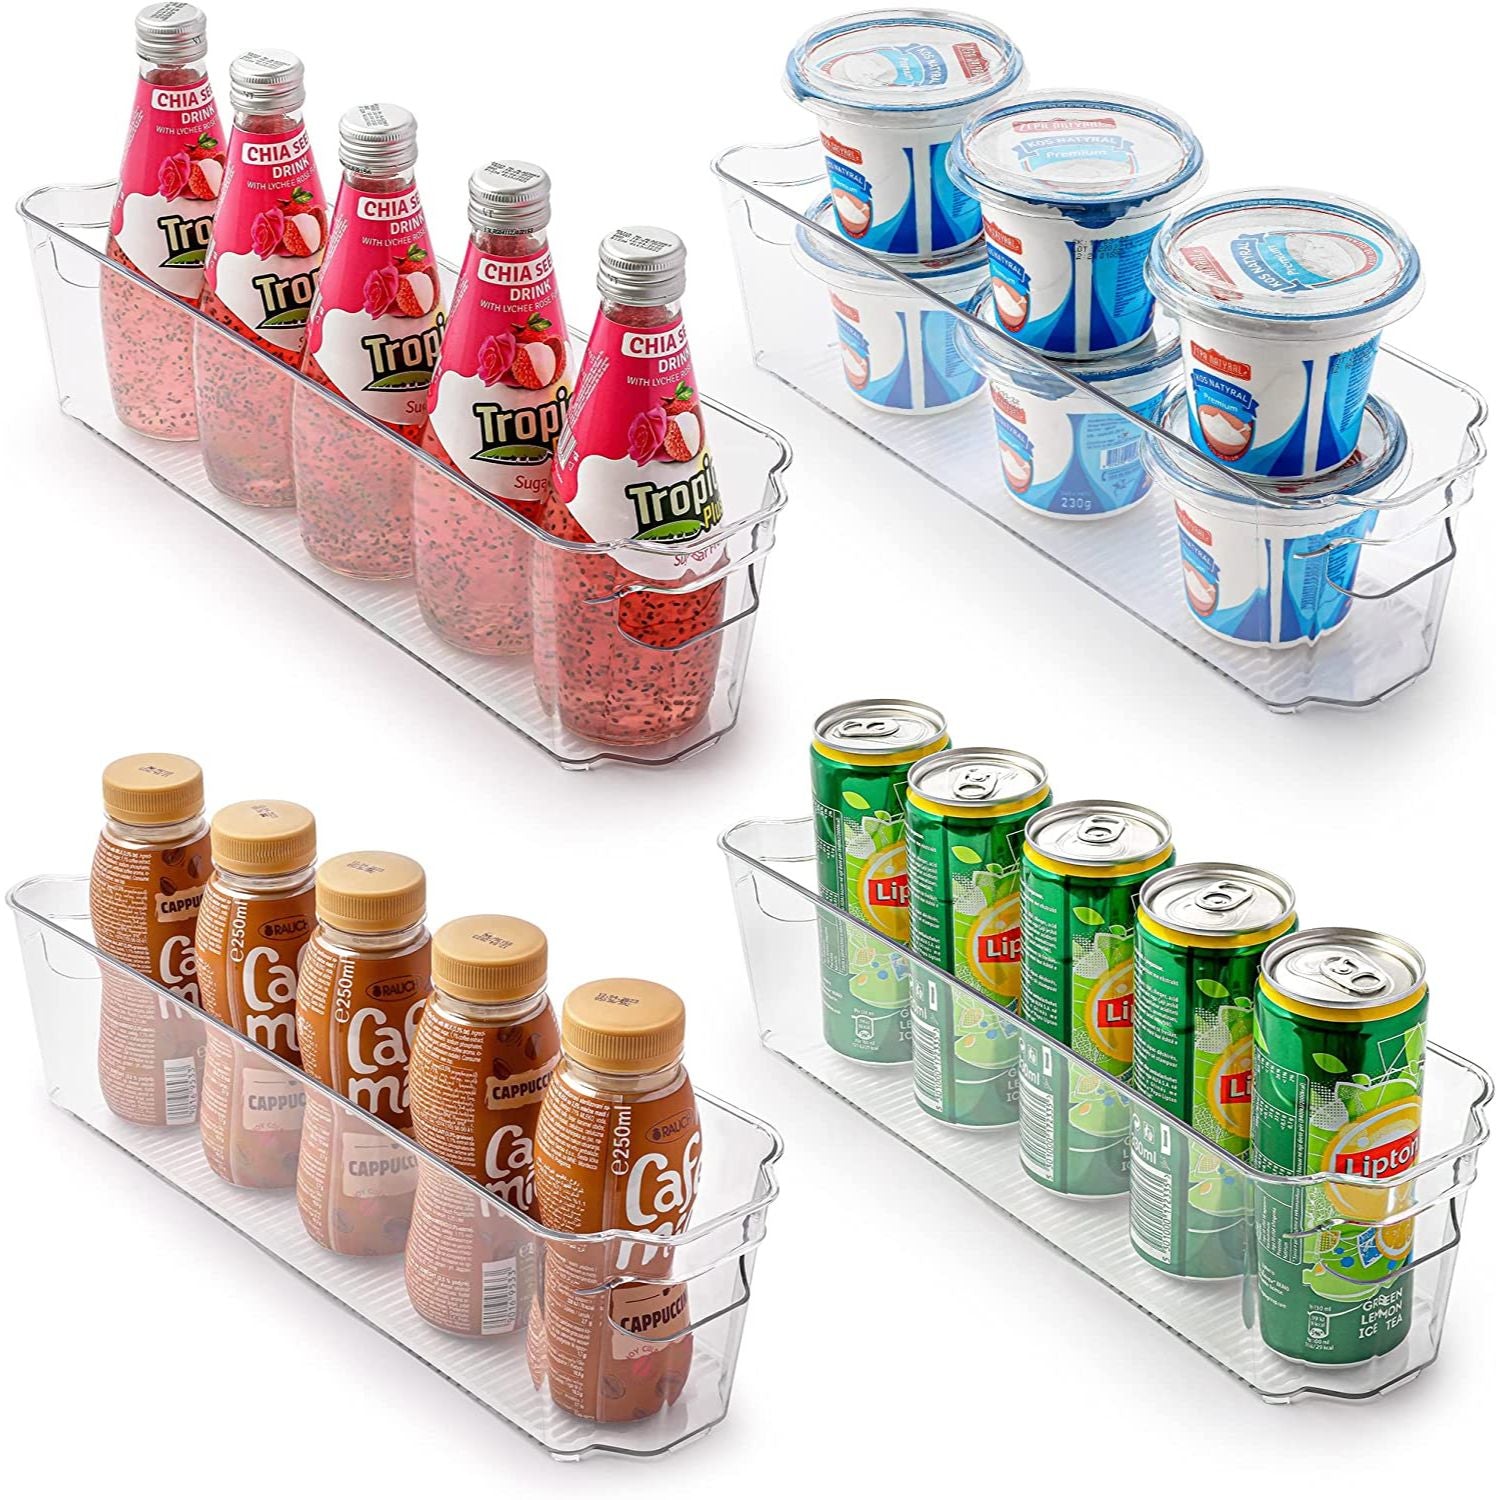 Clear Refrigerator Organizer Bins - 4pc - Easy To Access, Stackable Fridge Bins in Multiple Sizes